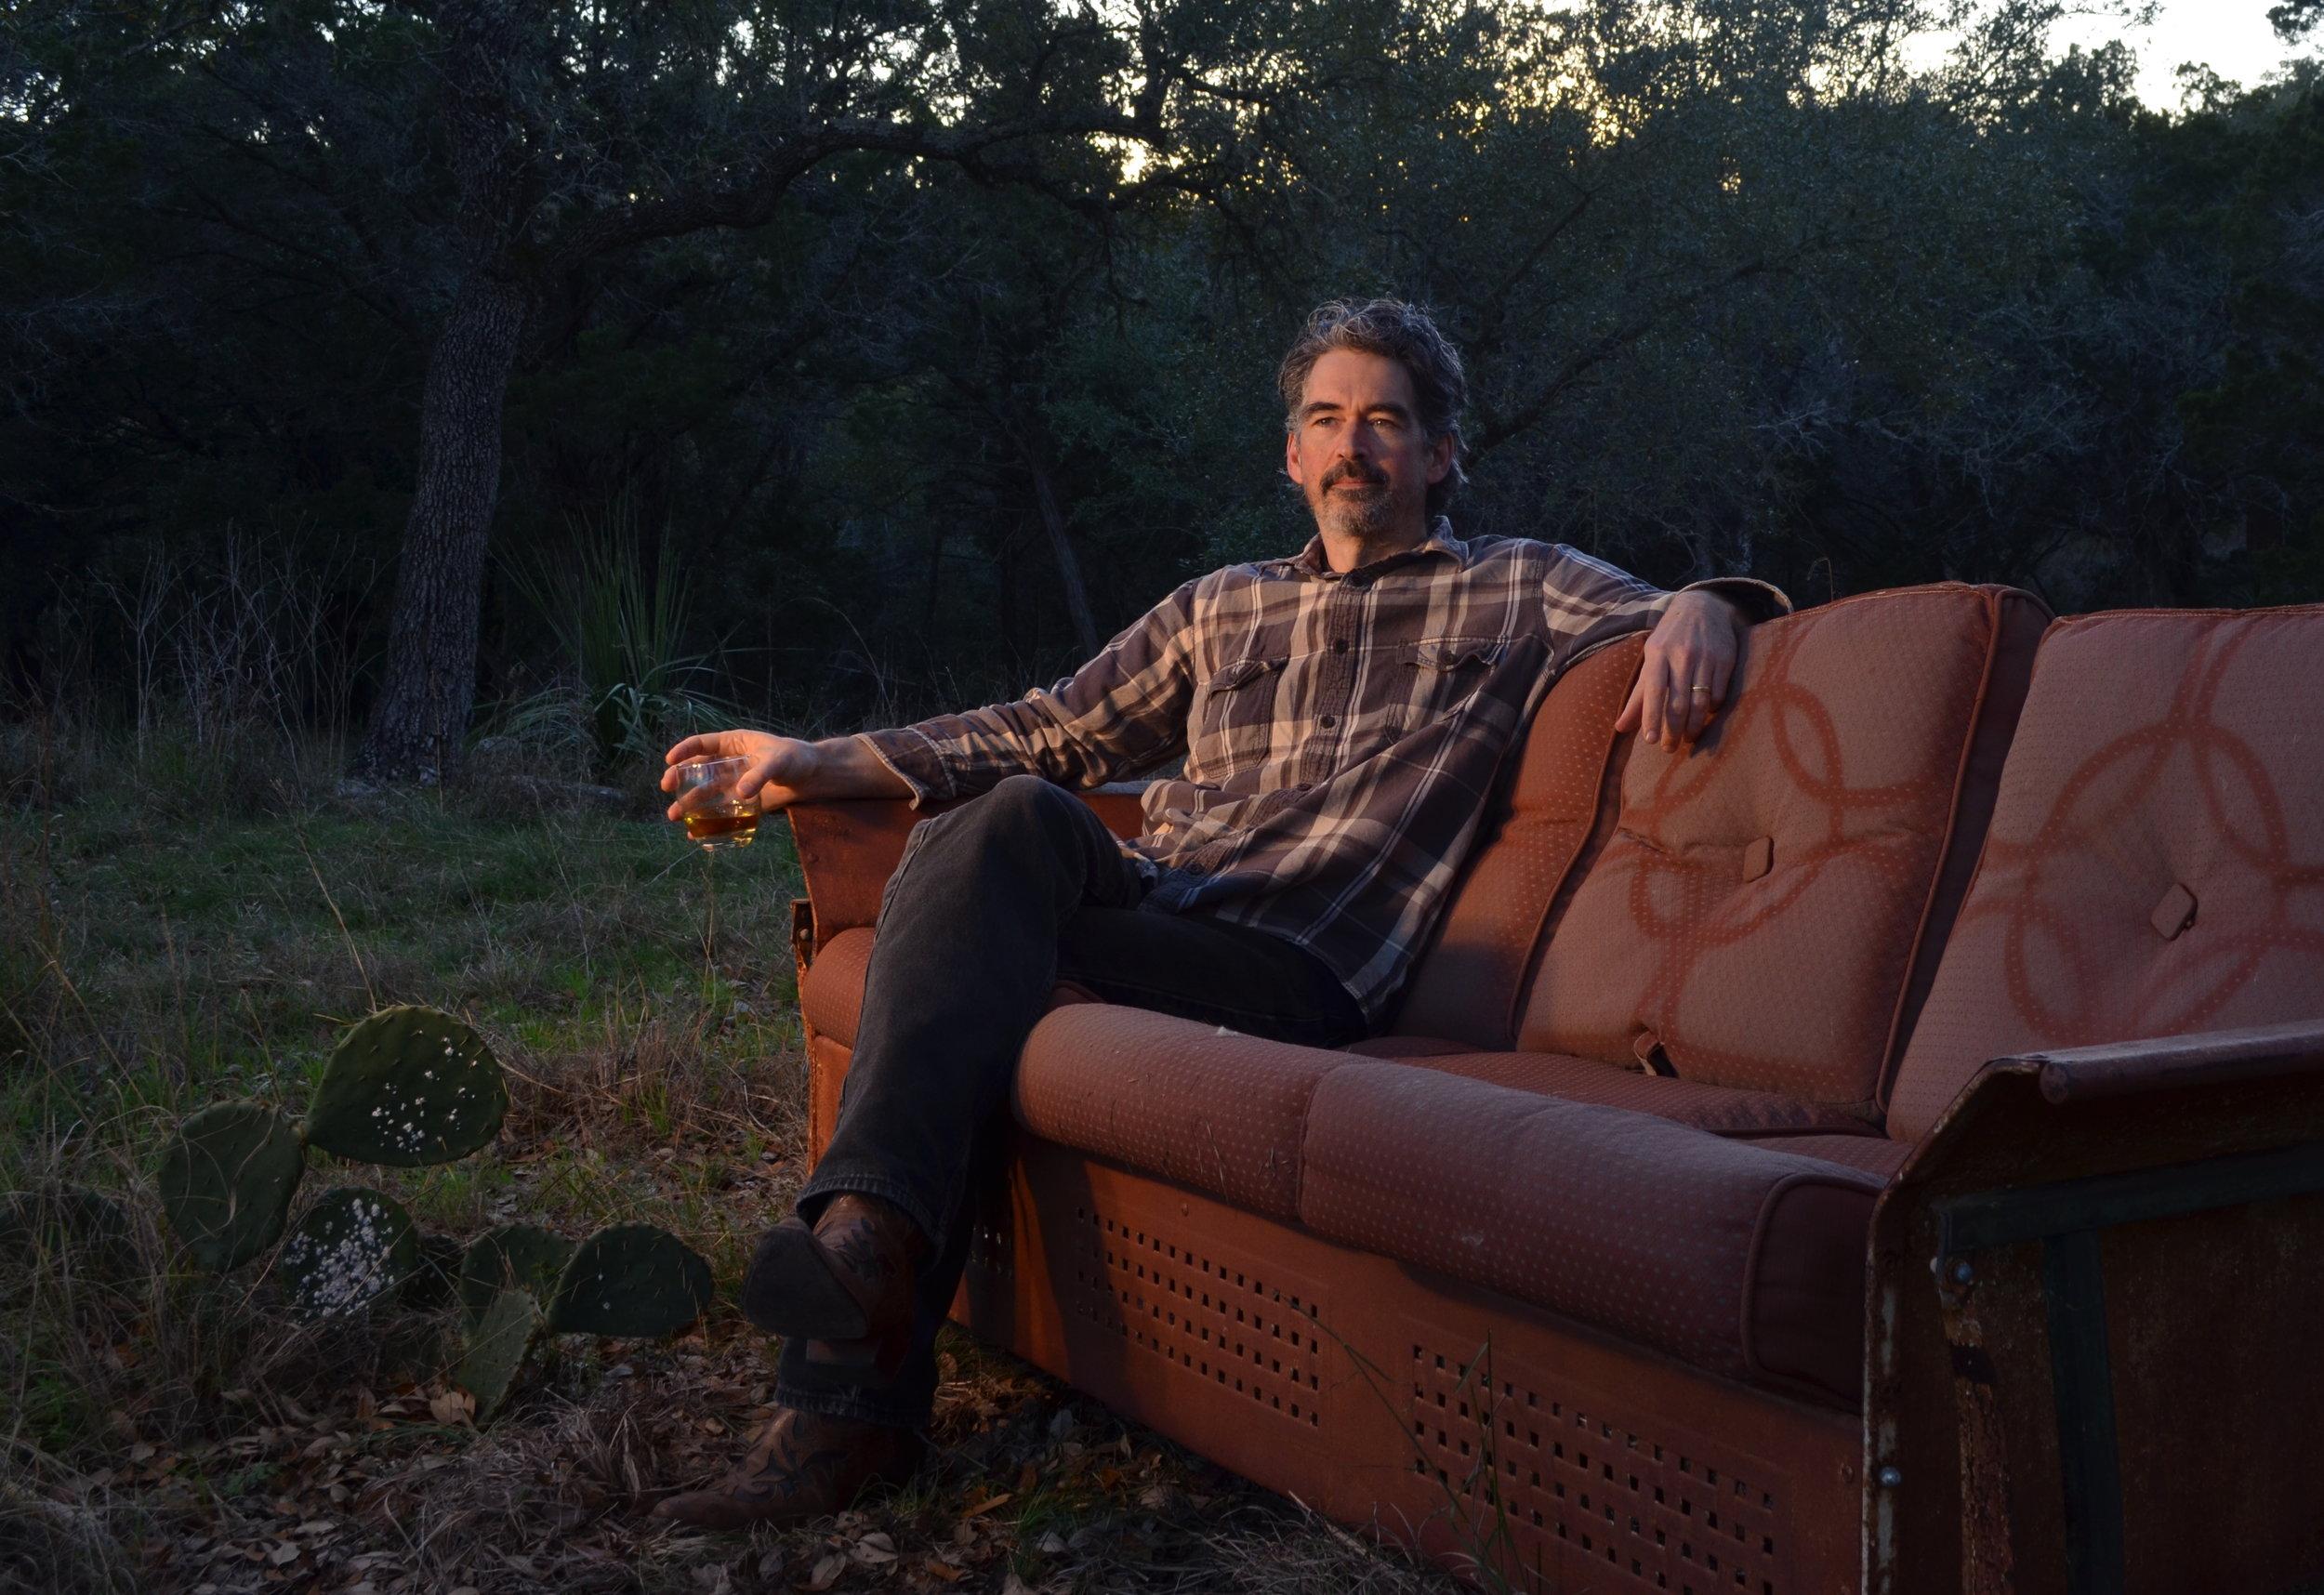 FAYETTEVILLE ROOTS PRESENTS: Slaid Cleaves